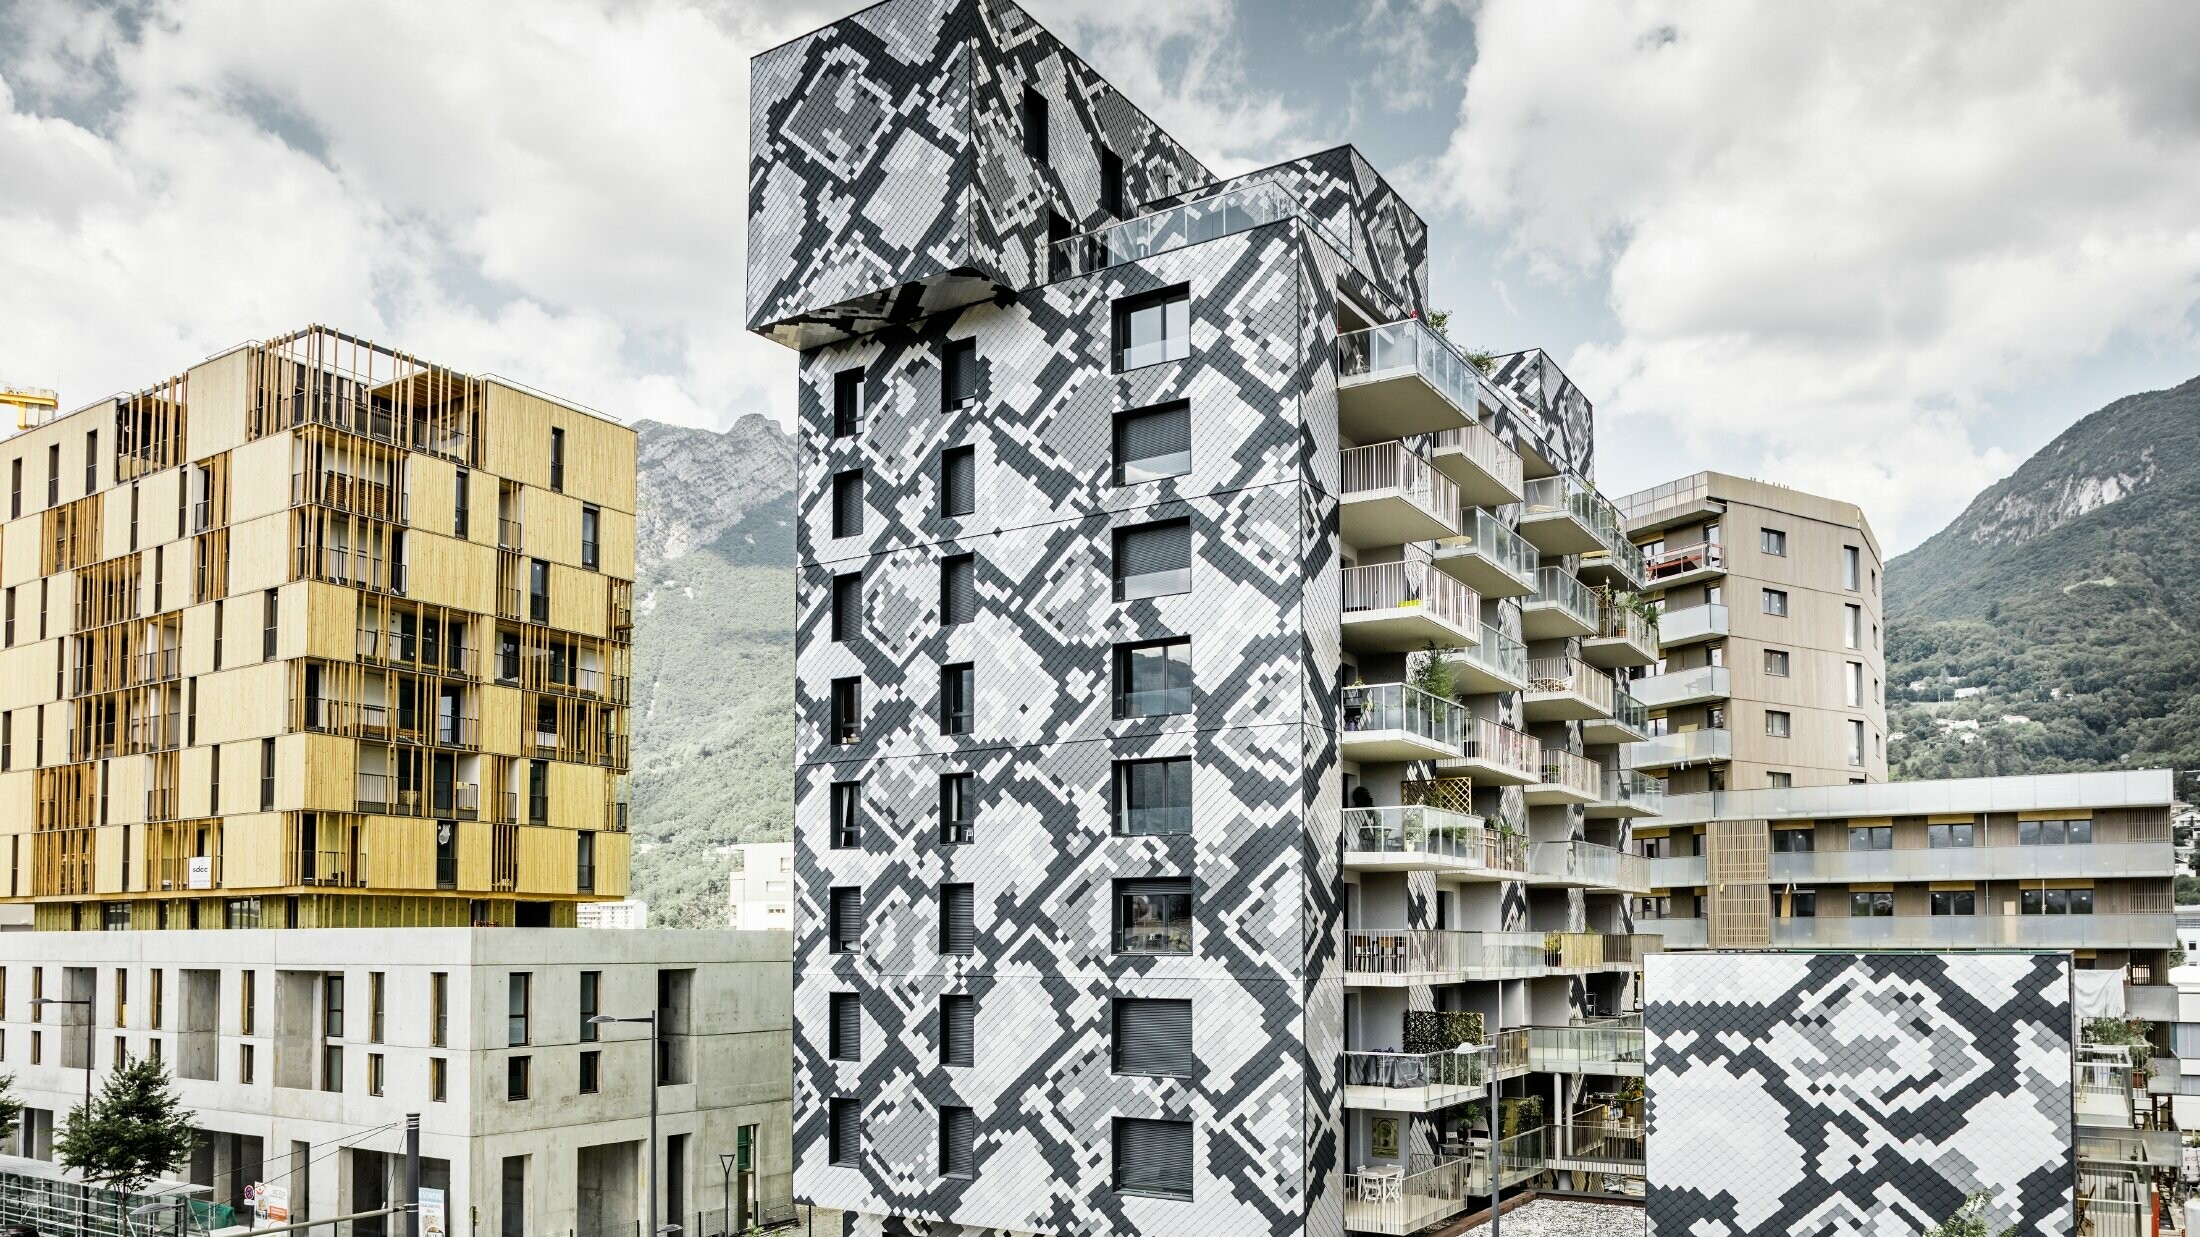 Impressive façade design on the Le Python residential building with a snake pattern. The façade was created using the PREFA rhomboid façade tiles in anthracite, light grey, plain aluminium and metallic silver.